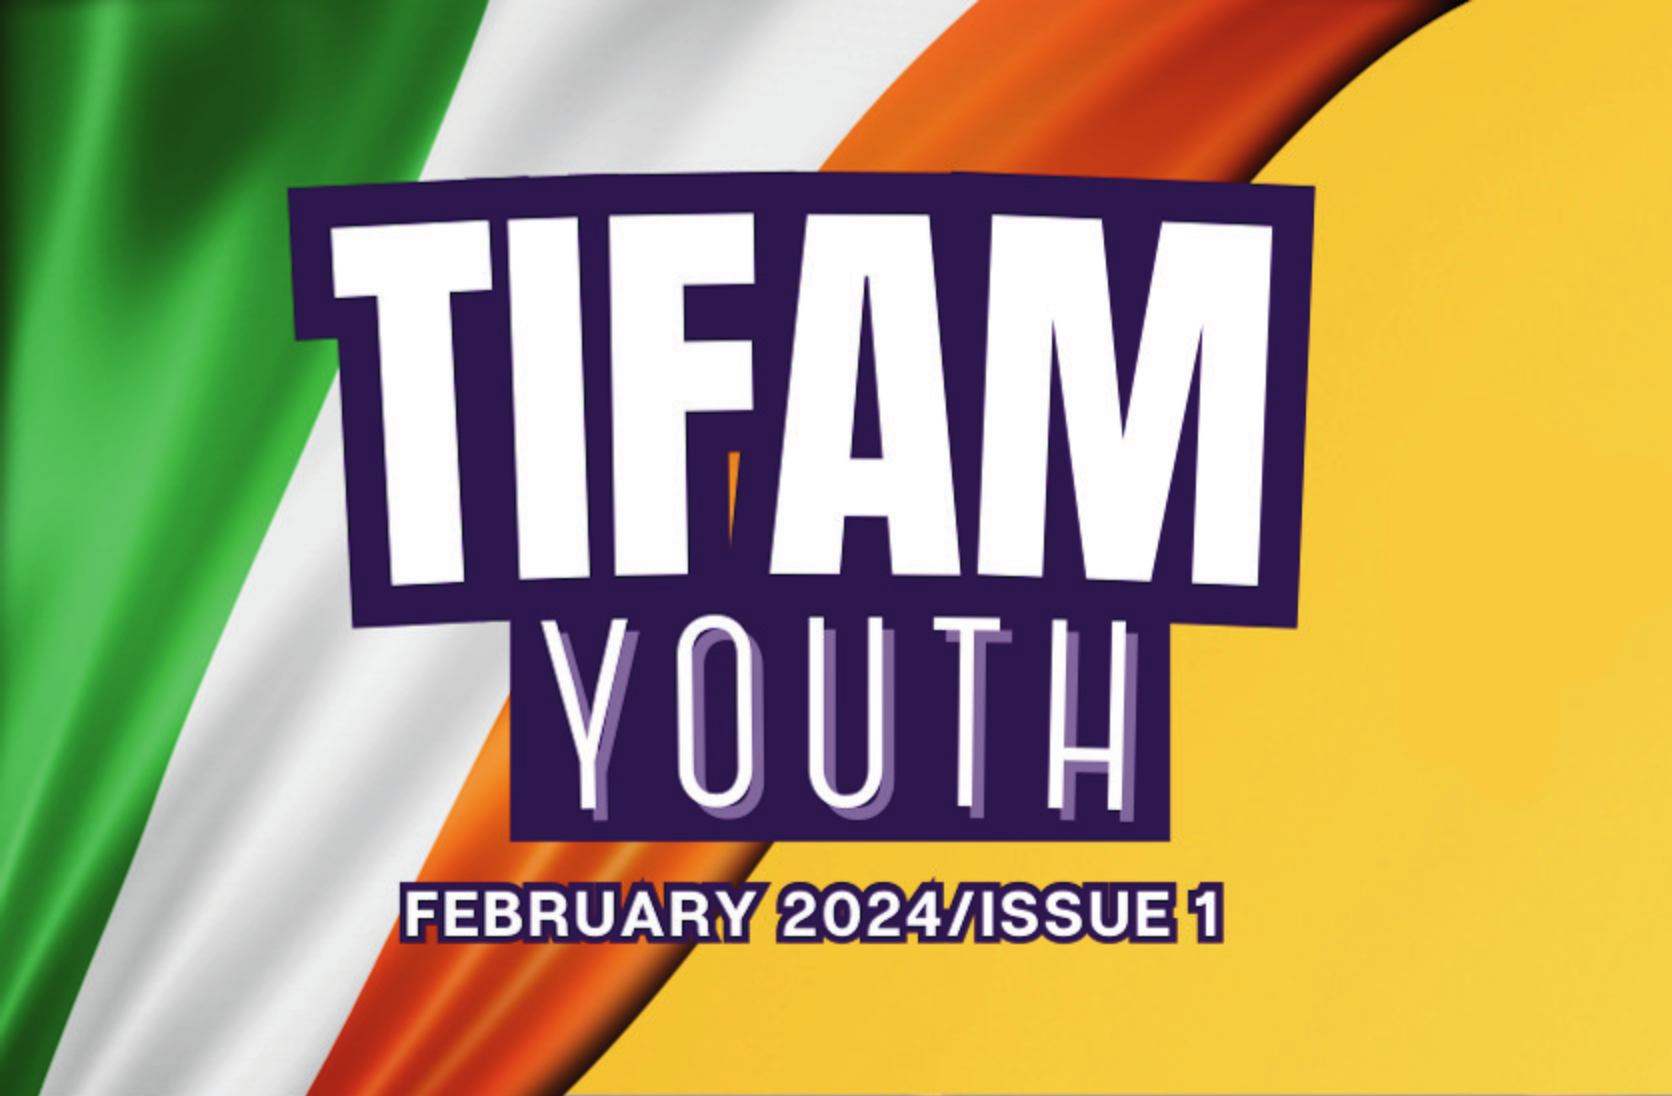 Launch of the First Issue of TIFAM YOUTH Archery Magazine in February!